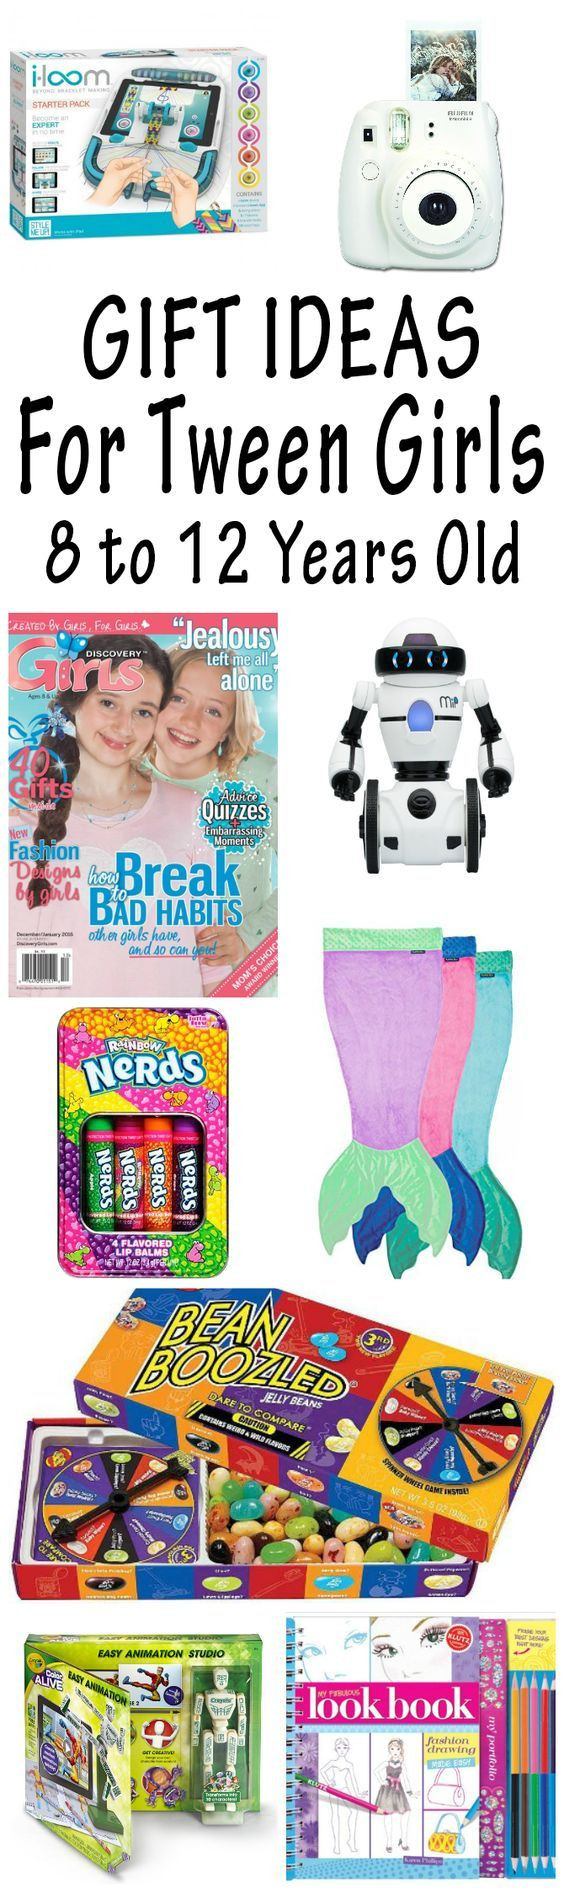 Gift Ideas For Tween Girls
 Gift Ideas For Tween Girls They Will Love 2018 Gift Guide